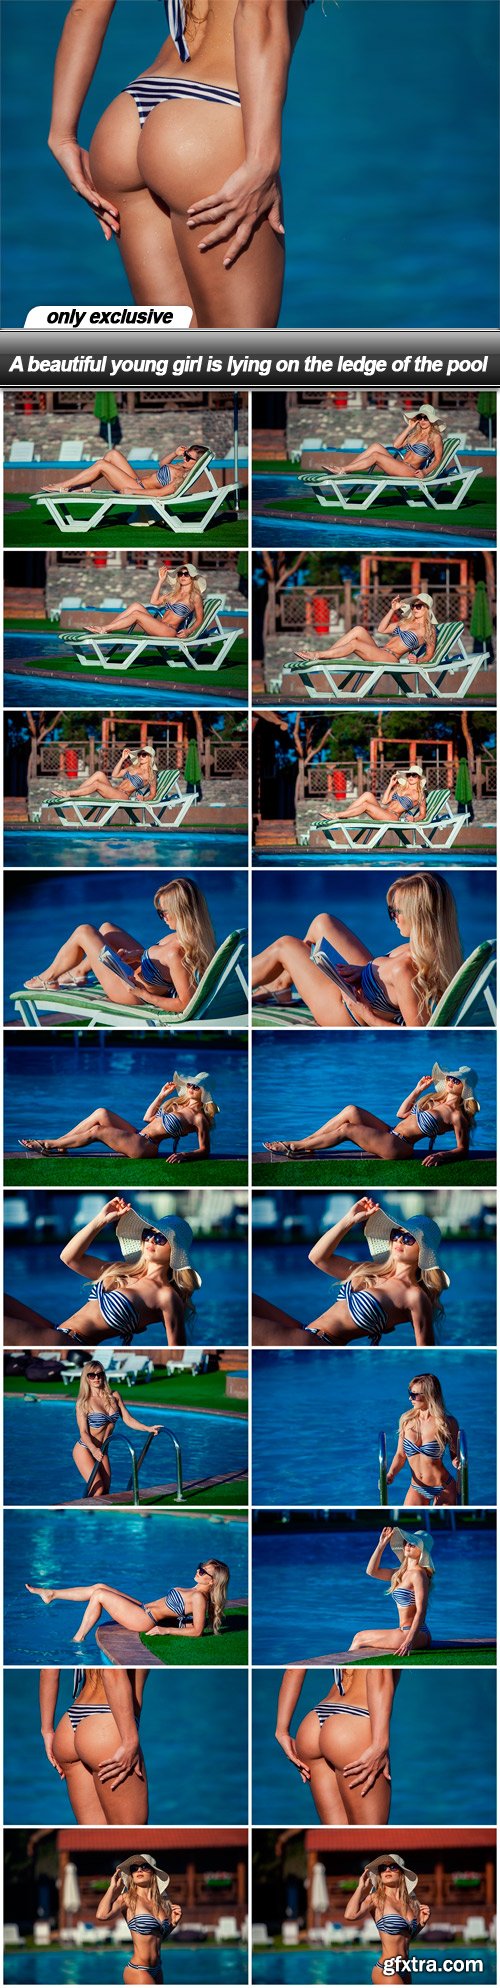 A beautiful young girl is lying on the ledge of the pool - 20 UHQ JPEG